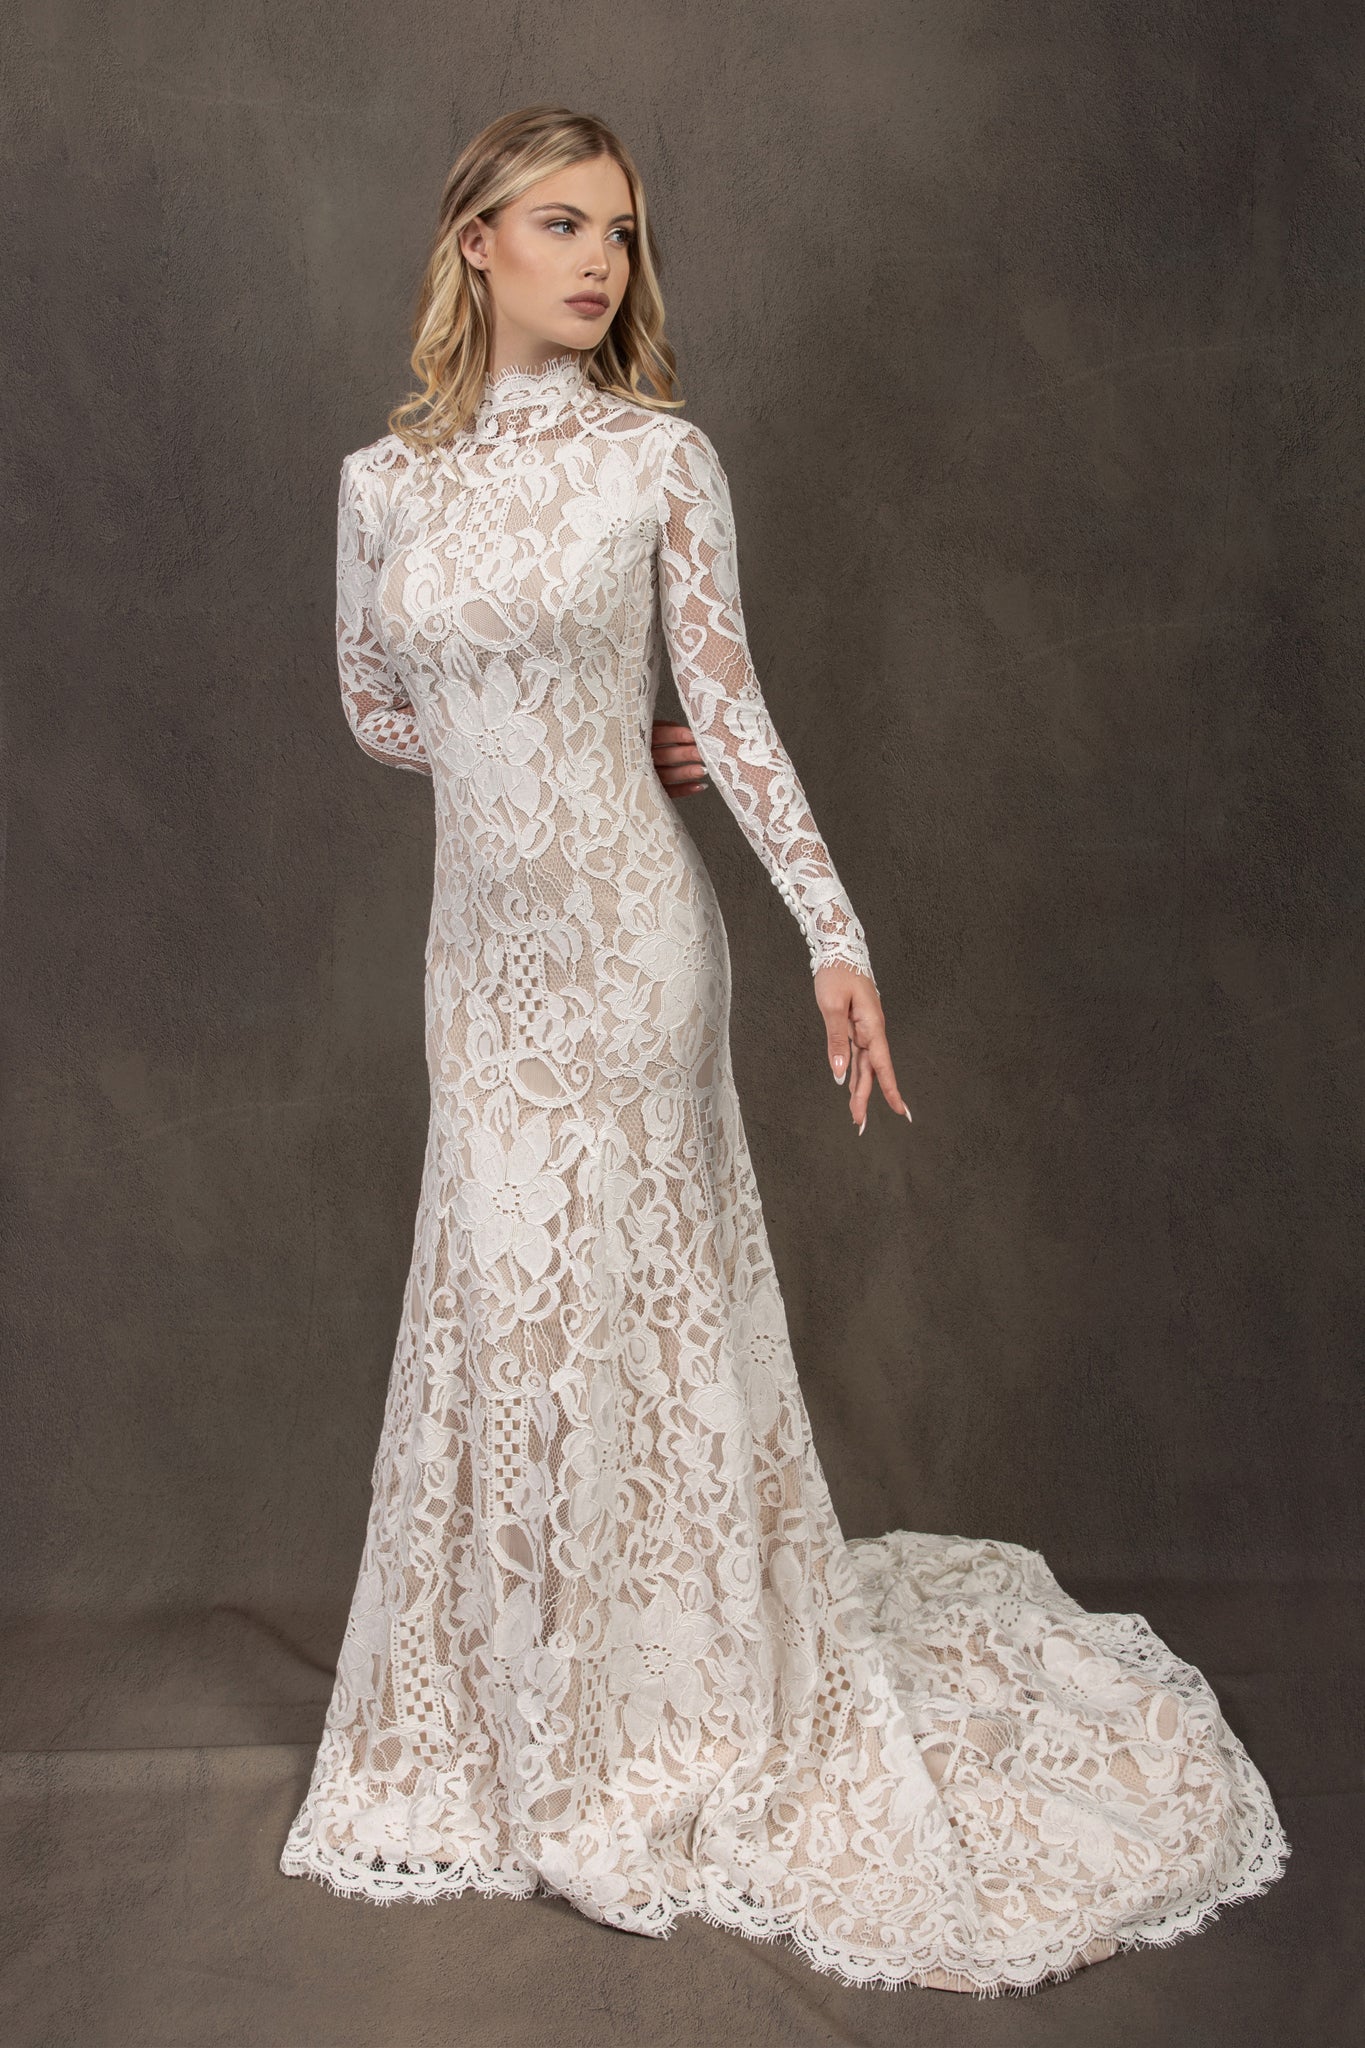 Bohemian lace wedding dress with turtleneck, open back and long sleevess.